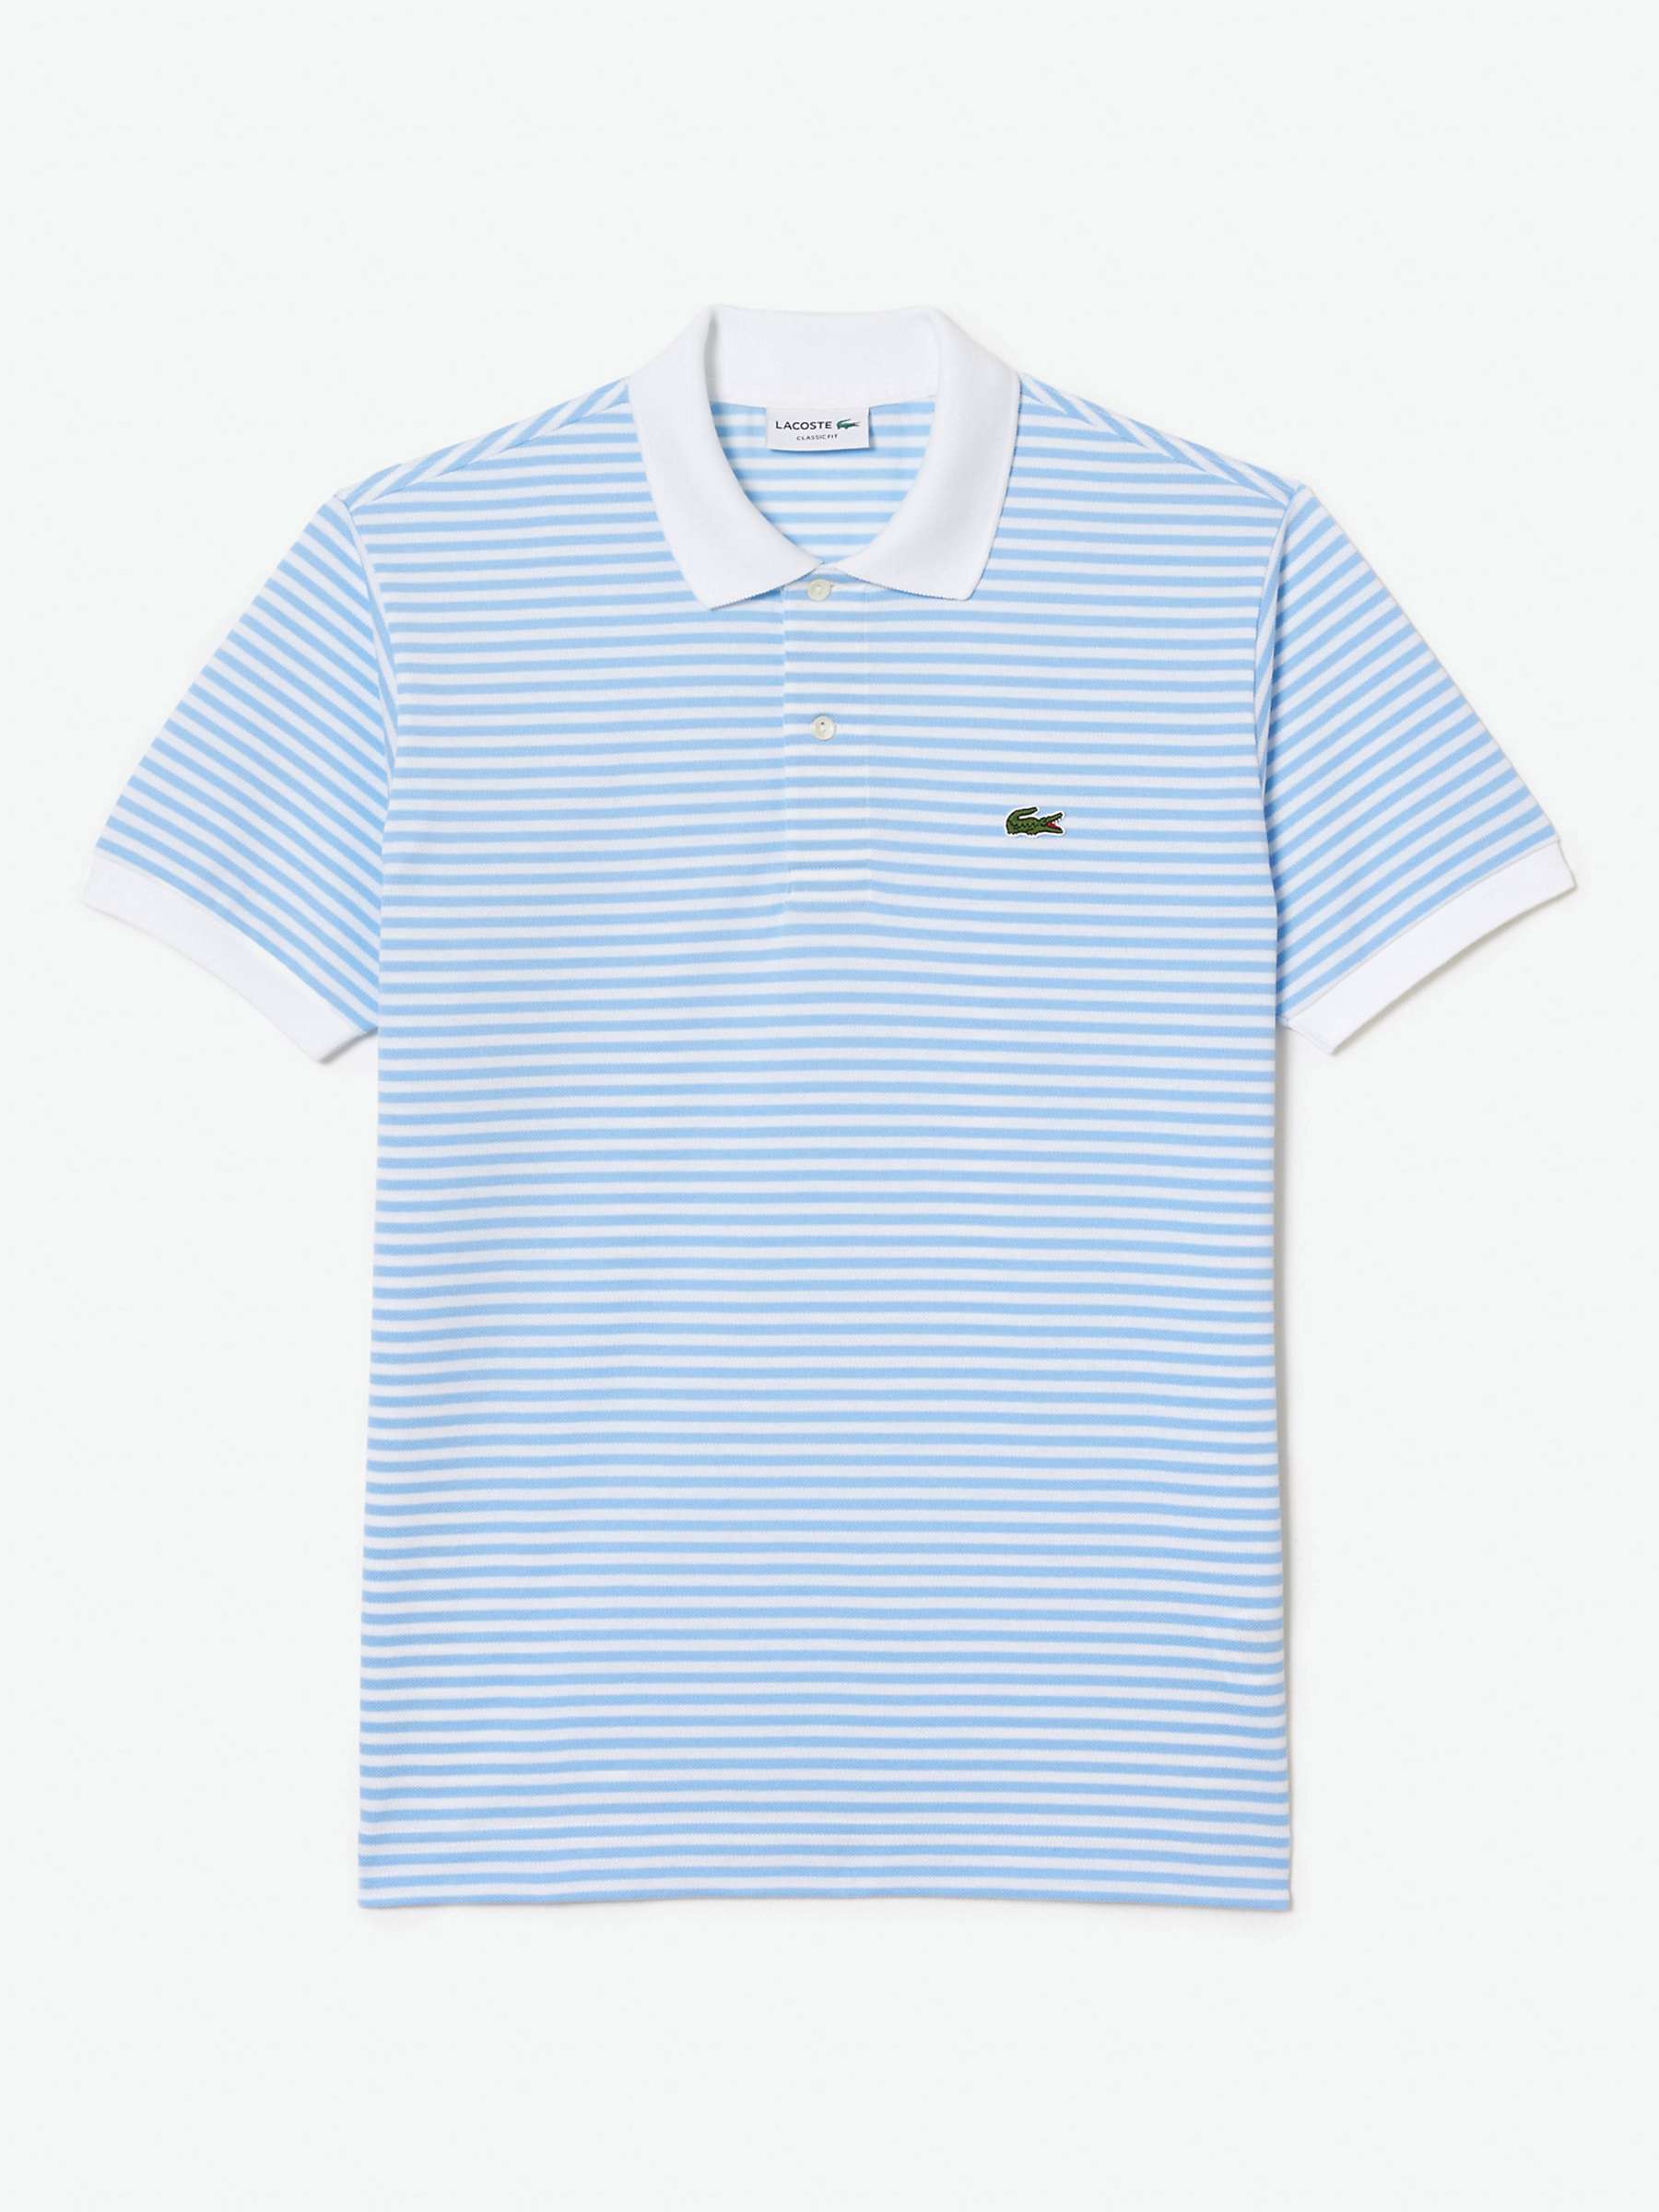 Buy Lacoste Core Essential Striped Cotton Polo Shirt, Blue/White Online at johnlewis.com